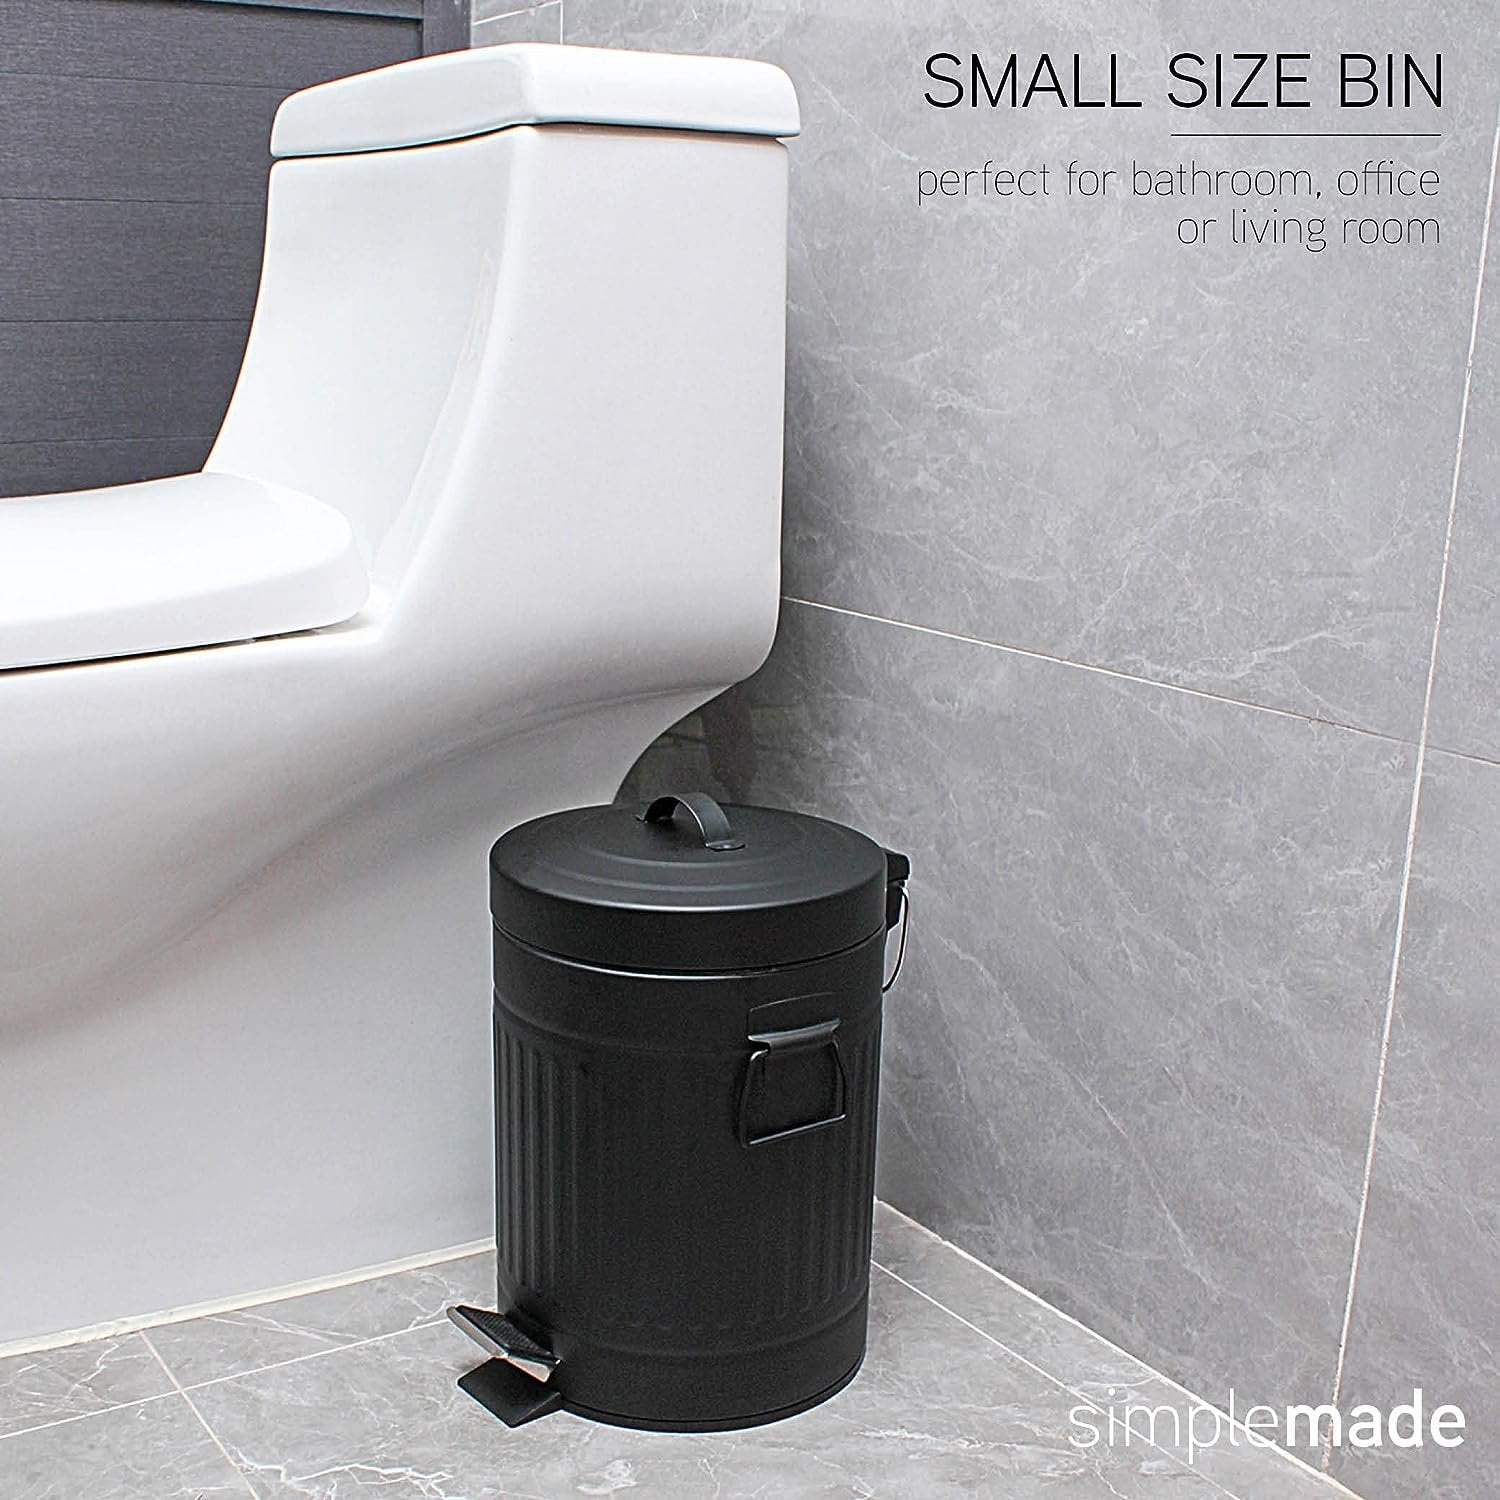 SIMPLEMADE Round Step Trash Can, Stainless Steel with Lid, Small Metal Wastebasket / Garbage Can For Bathroom, Office, Black, 5 Liter / 1.3 Gallon -